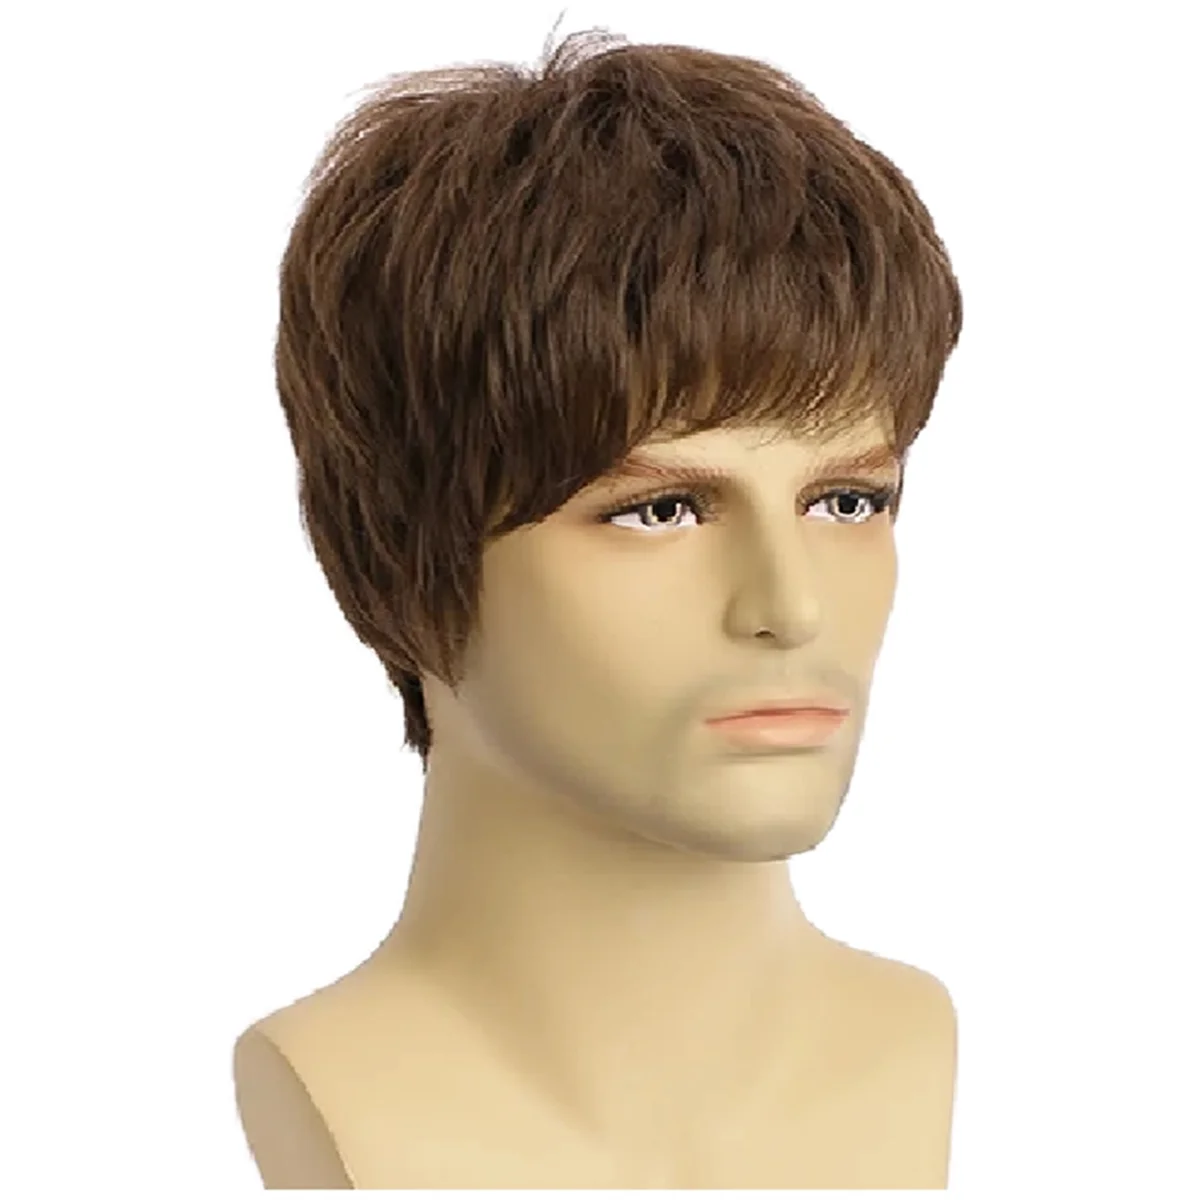 

Short Natural Curly Hair for Male Young Men Heat Resistant Fiber Synthetic Wigs